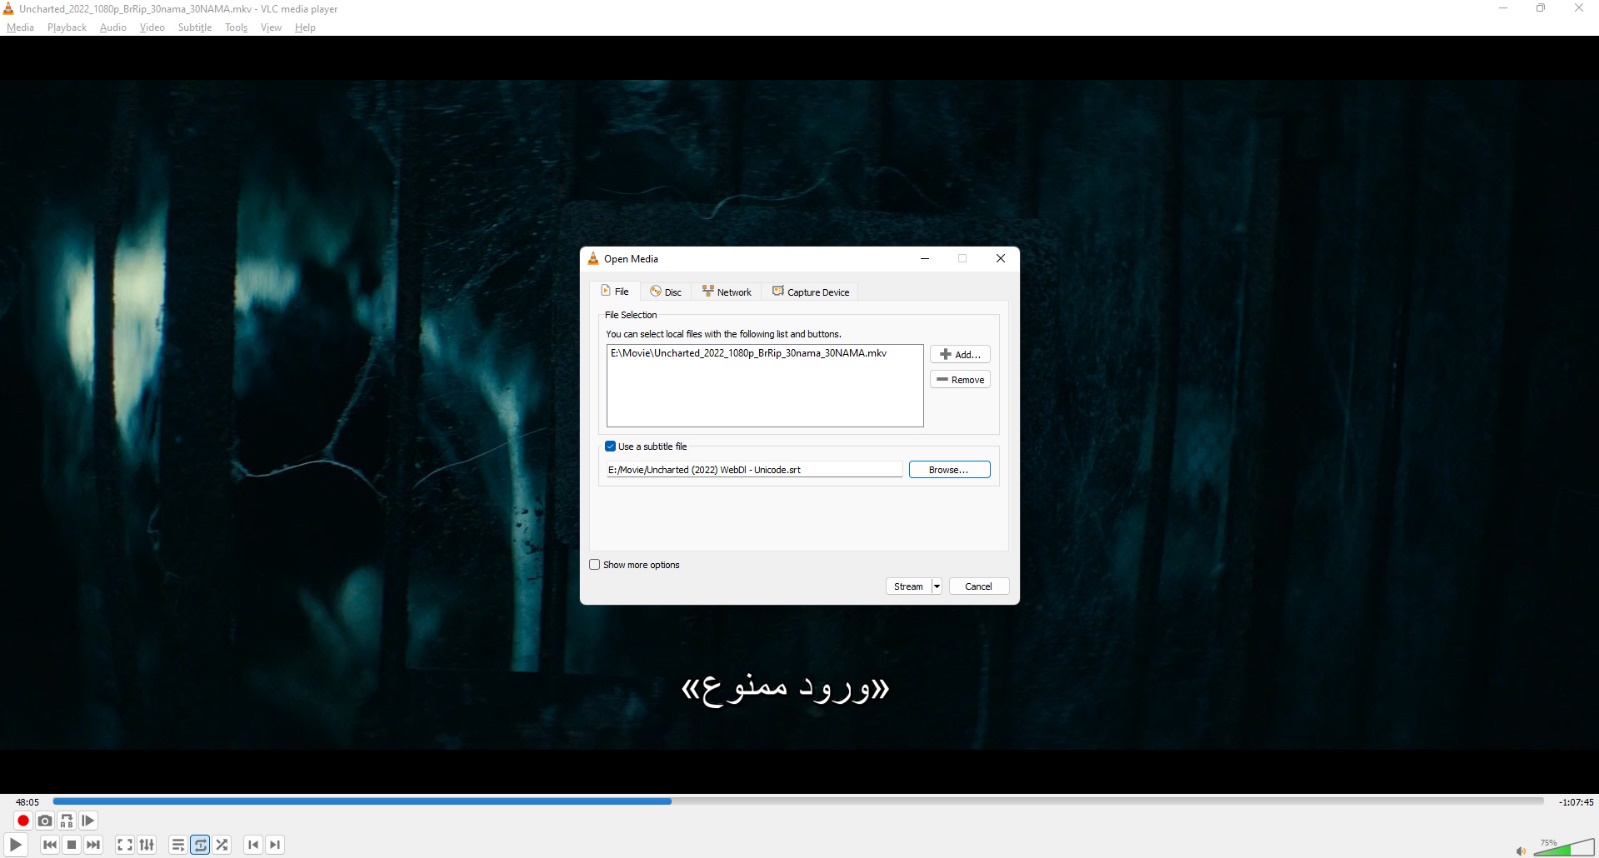 A new menu where you can add subtitles to videos in VLC